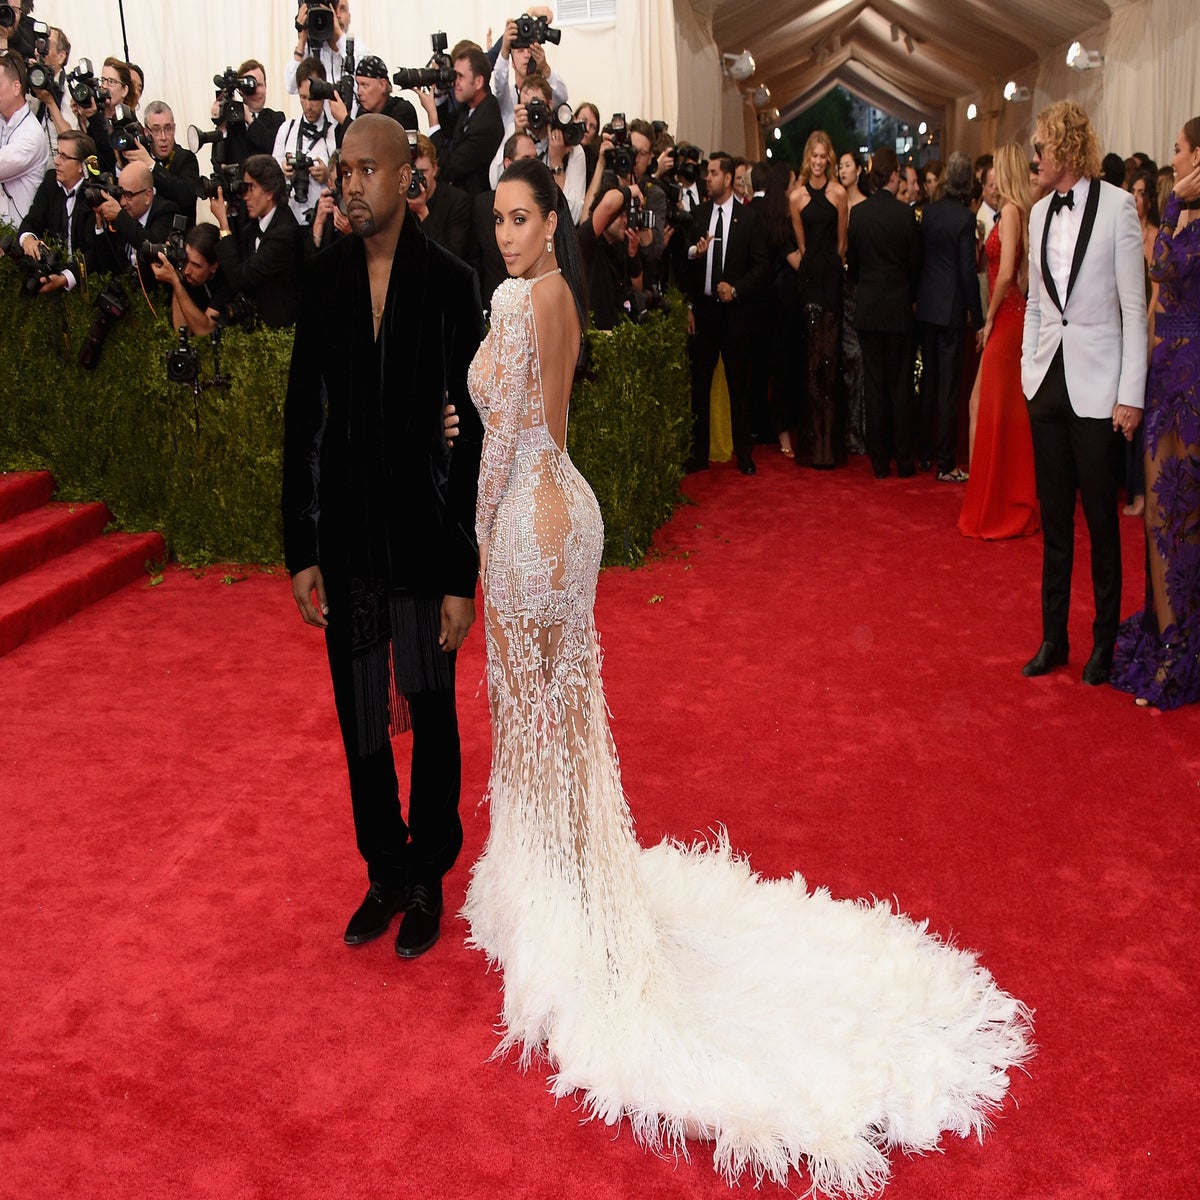 Kim Kardashian's Met Gala dress was inspired Cher The Independent | The Independent